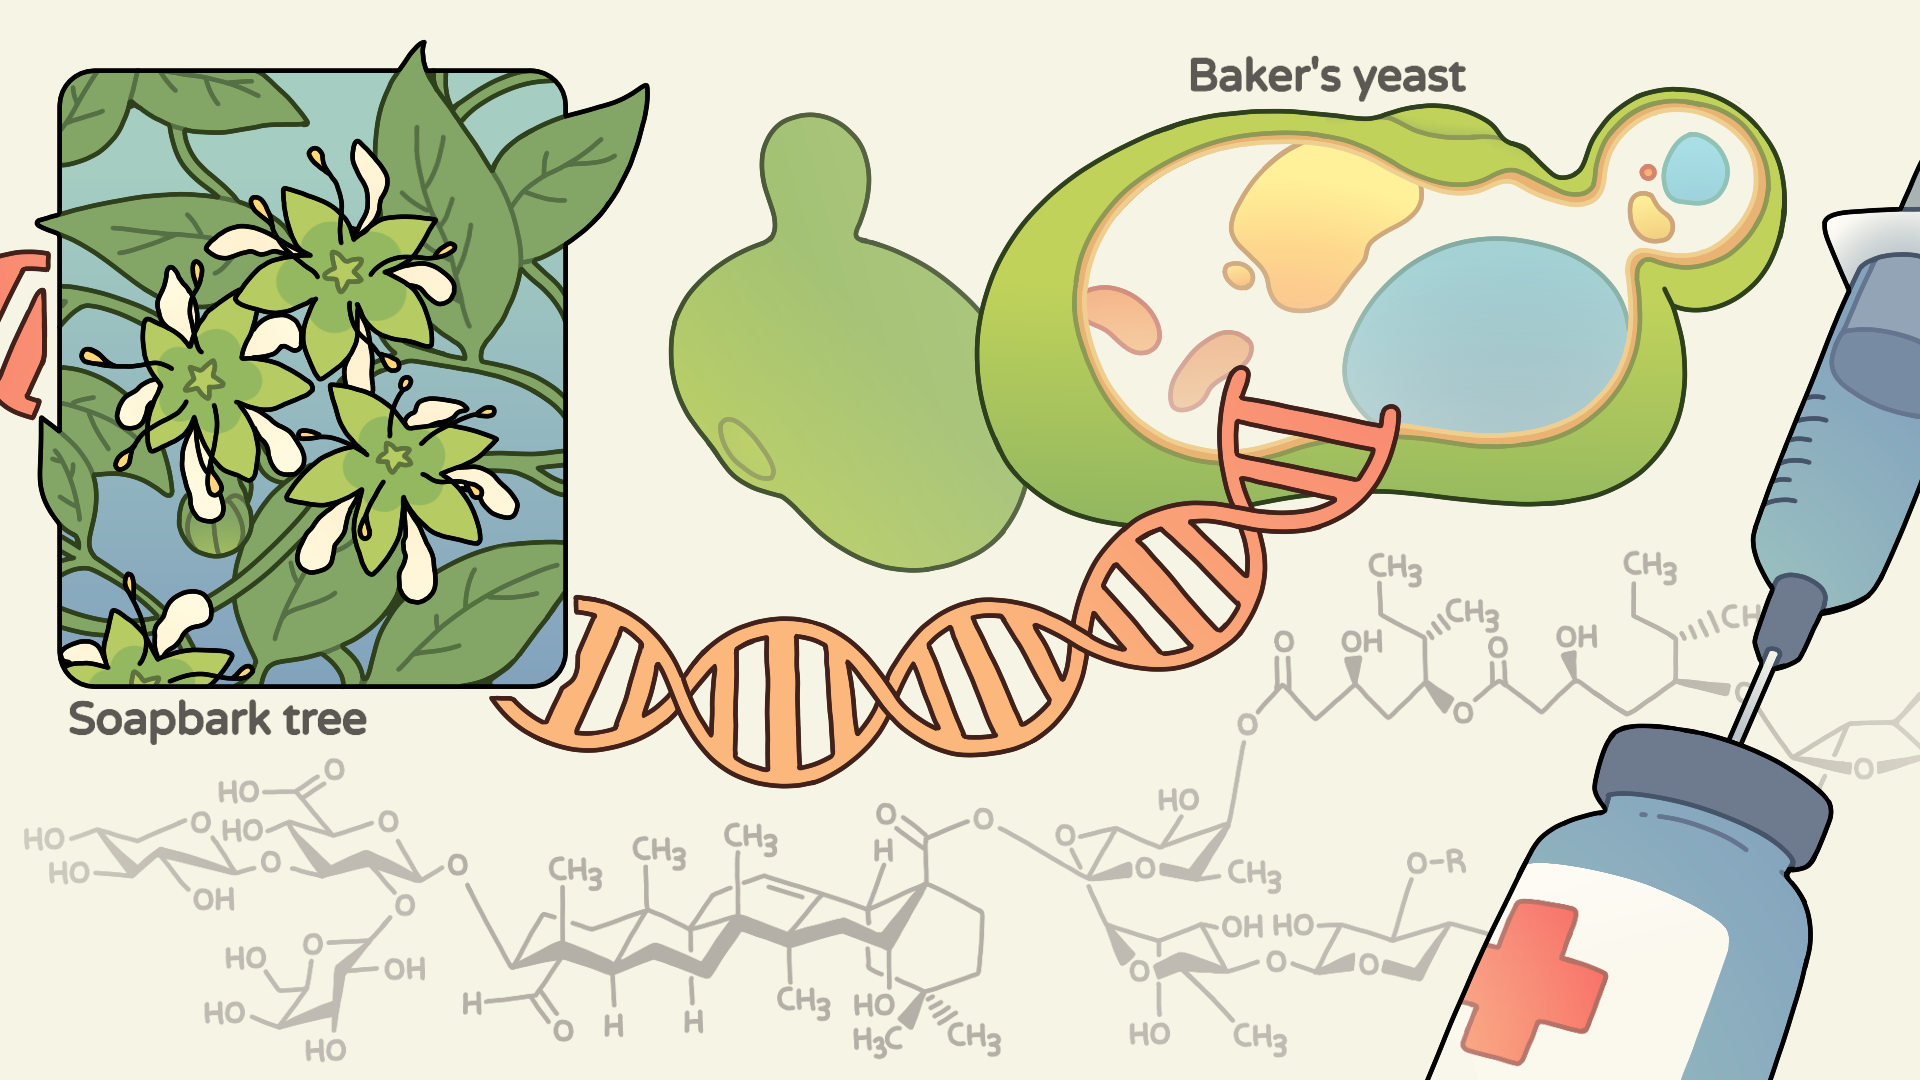 Soap bark tree and other organisms into yeast to create a biosynthetic pathway for building QS-21 molecule. Graphic by Bianca Susara, Berkeley Lab.